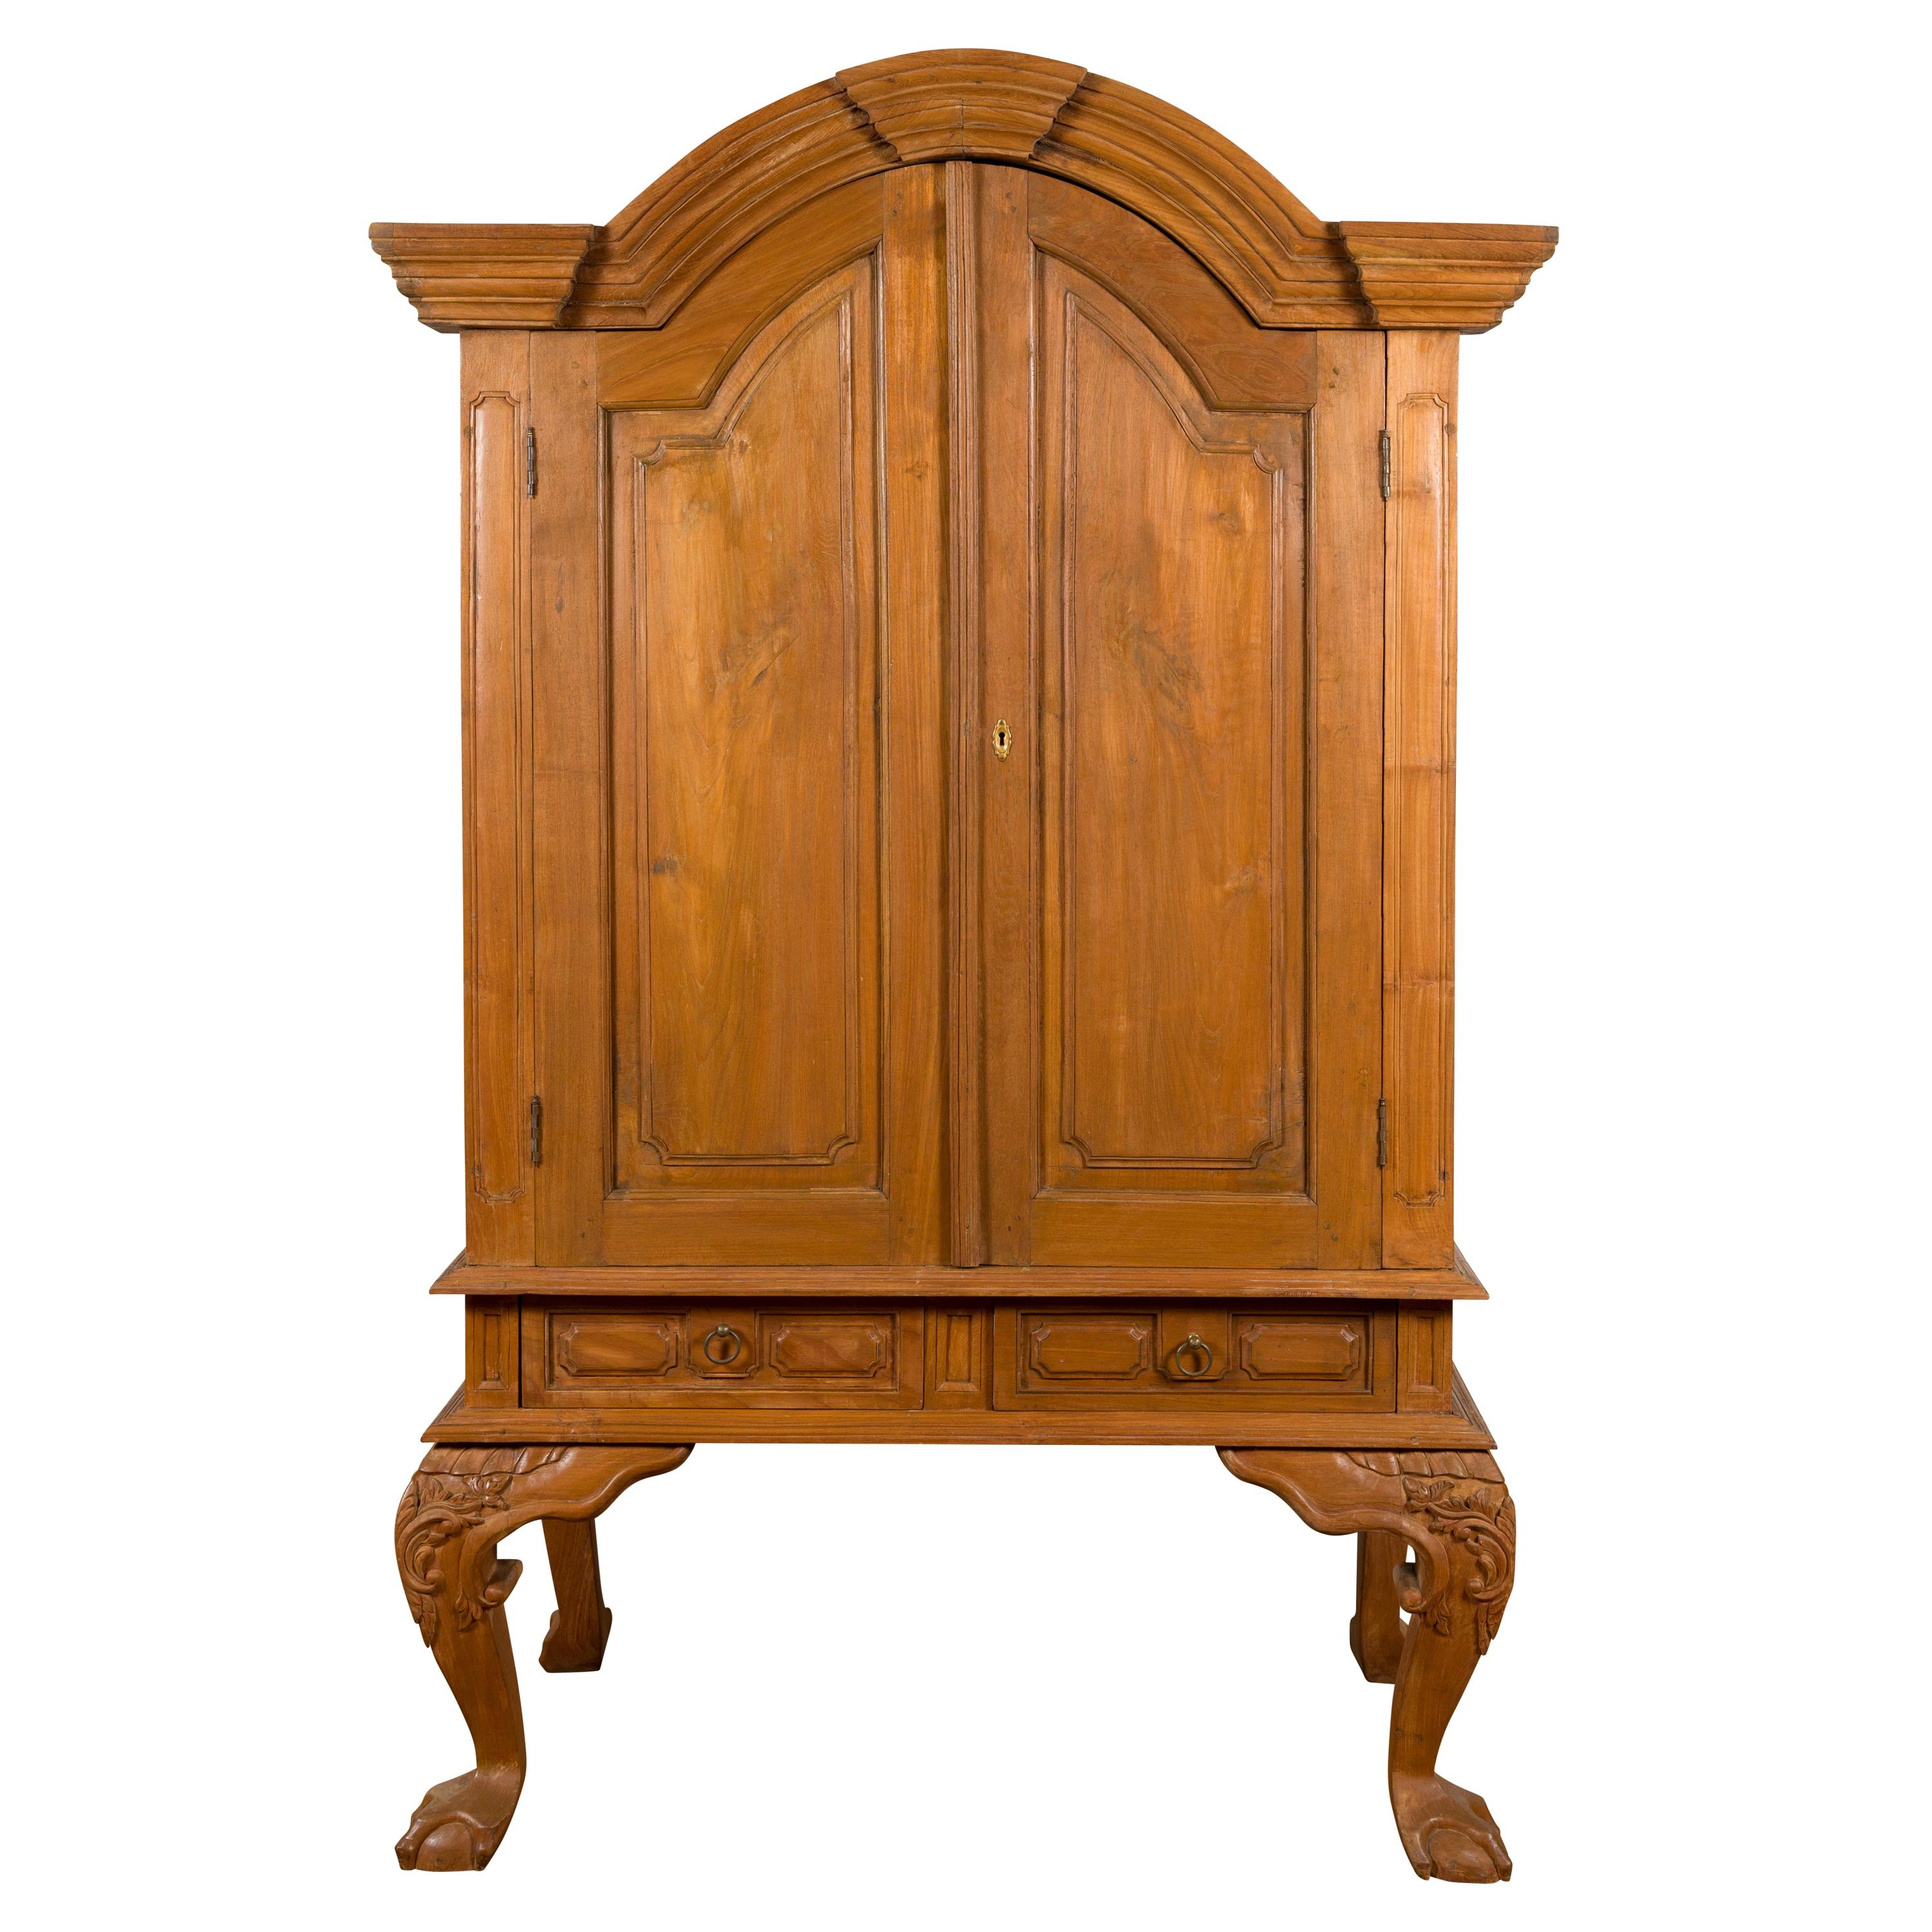 Dutch Colonial Late 19th Century Teak Cabinet with Bonnet Top and Cabriole Legs For Sale